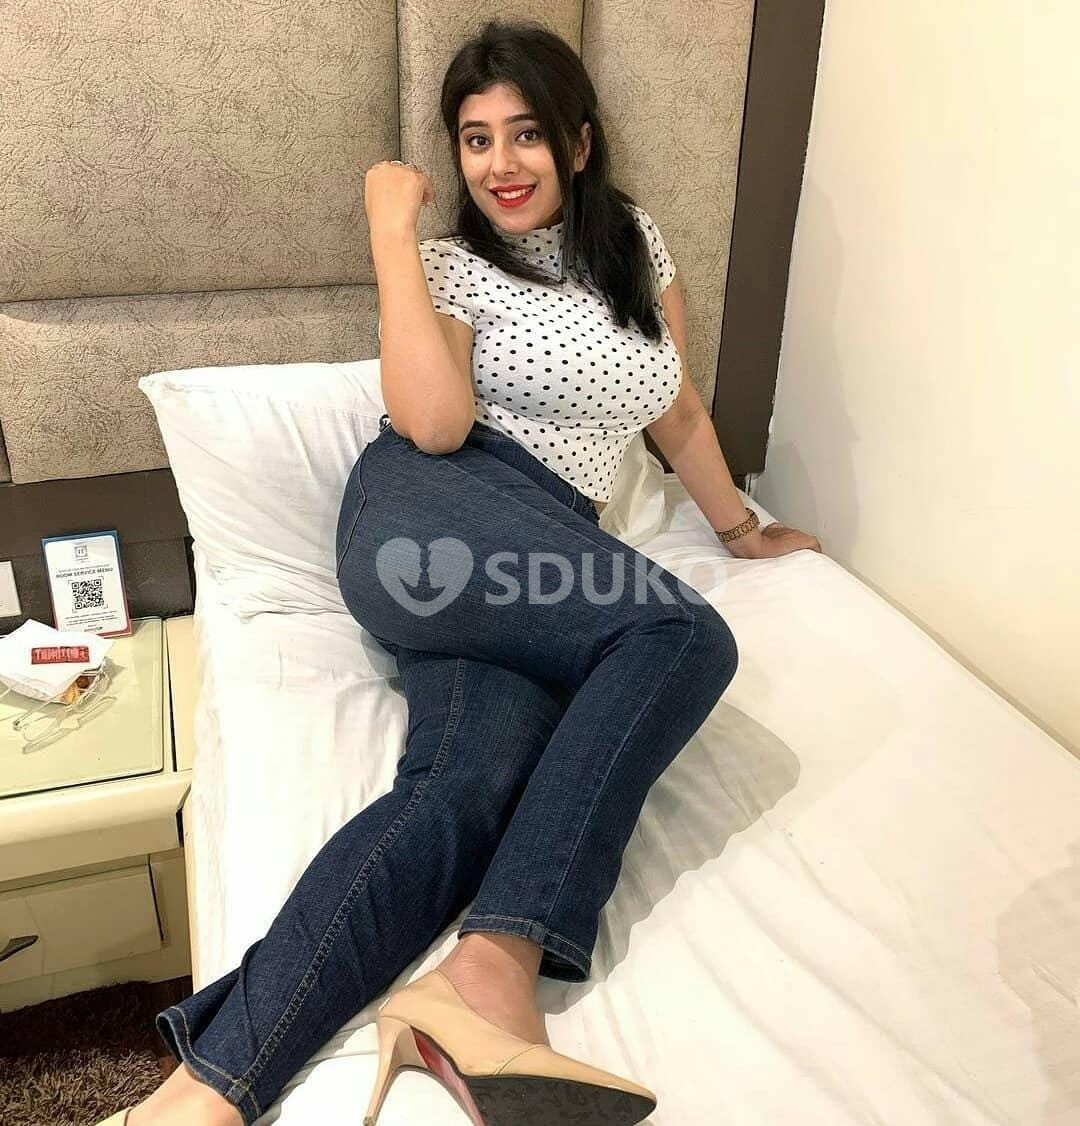 Nanded vip royal genuine in ⭐⭐⭐💯 Royal Eskort Sarvice Safe and secure service low price High profile girls avai